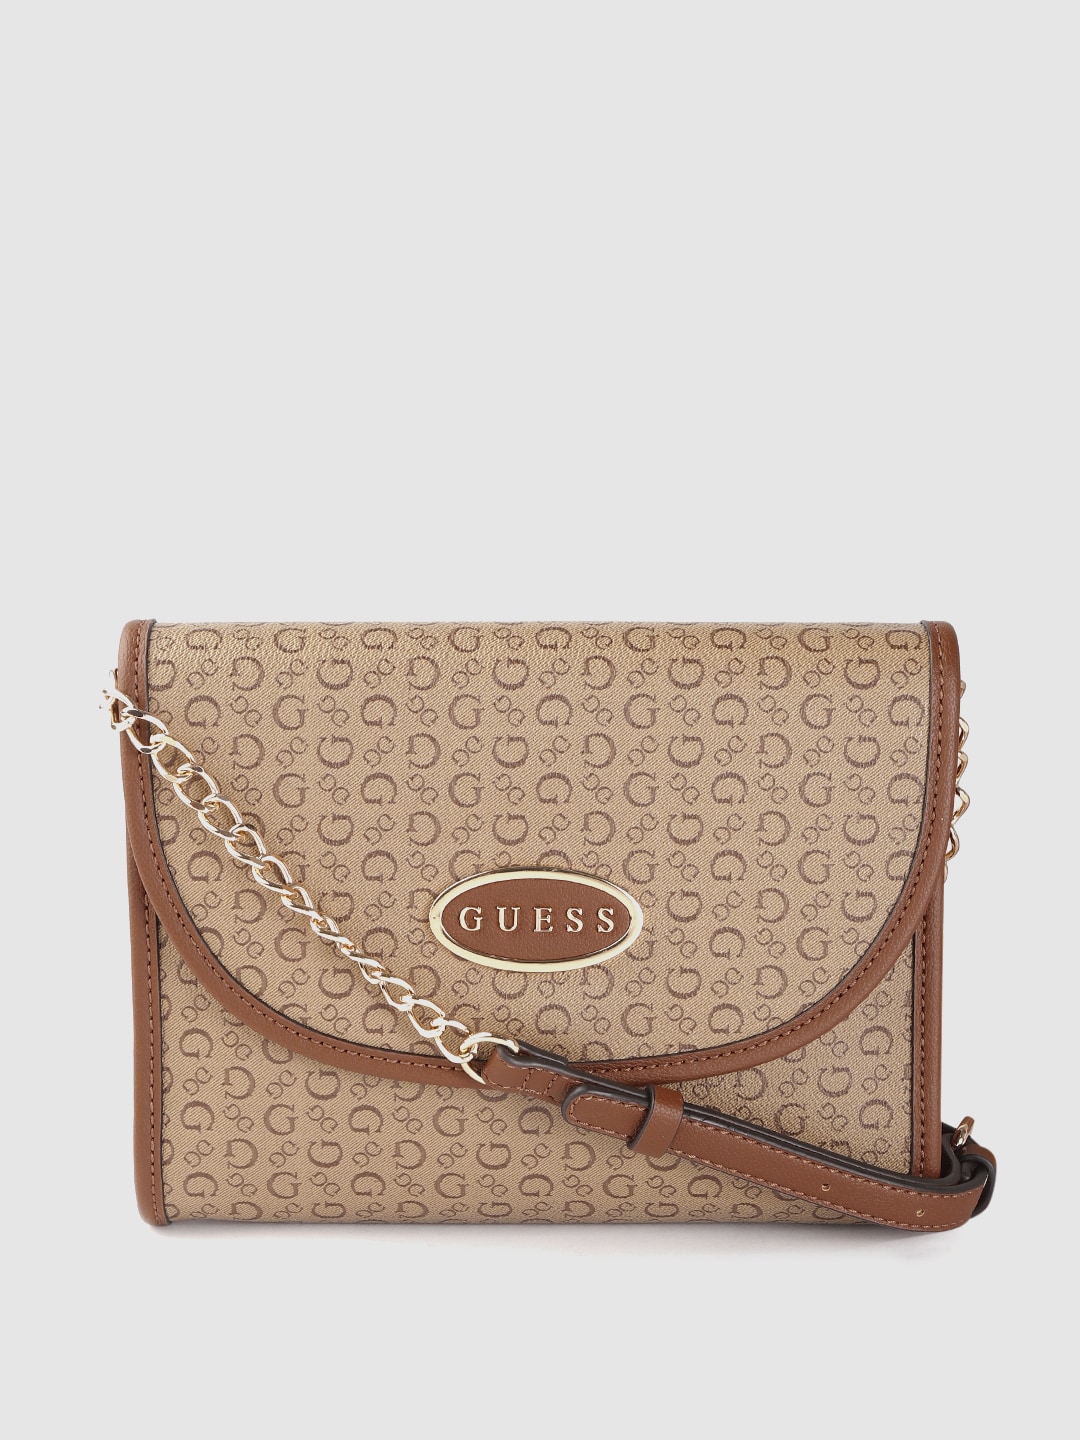 GUESS Brown Brand Logo Printed Structured Sling Bag Price in India